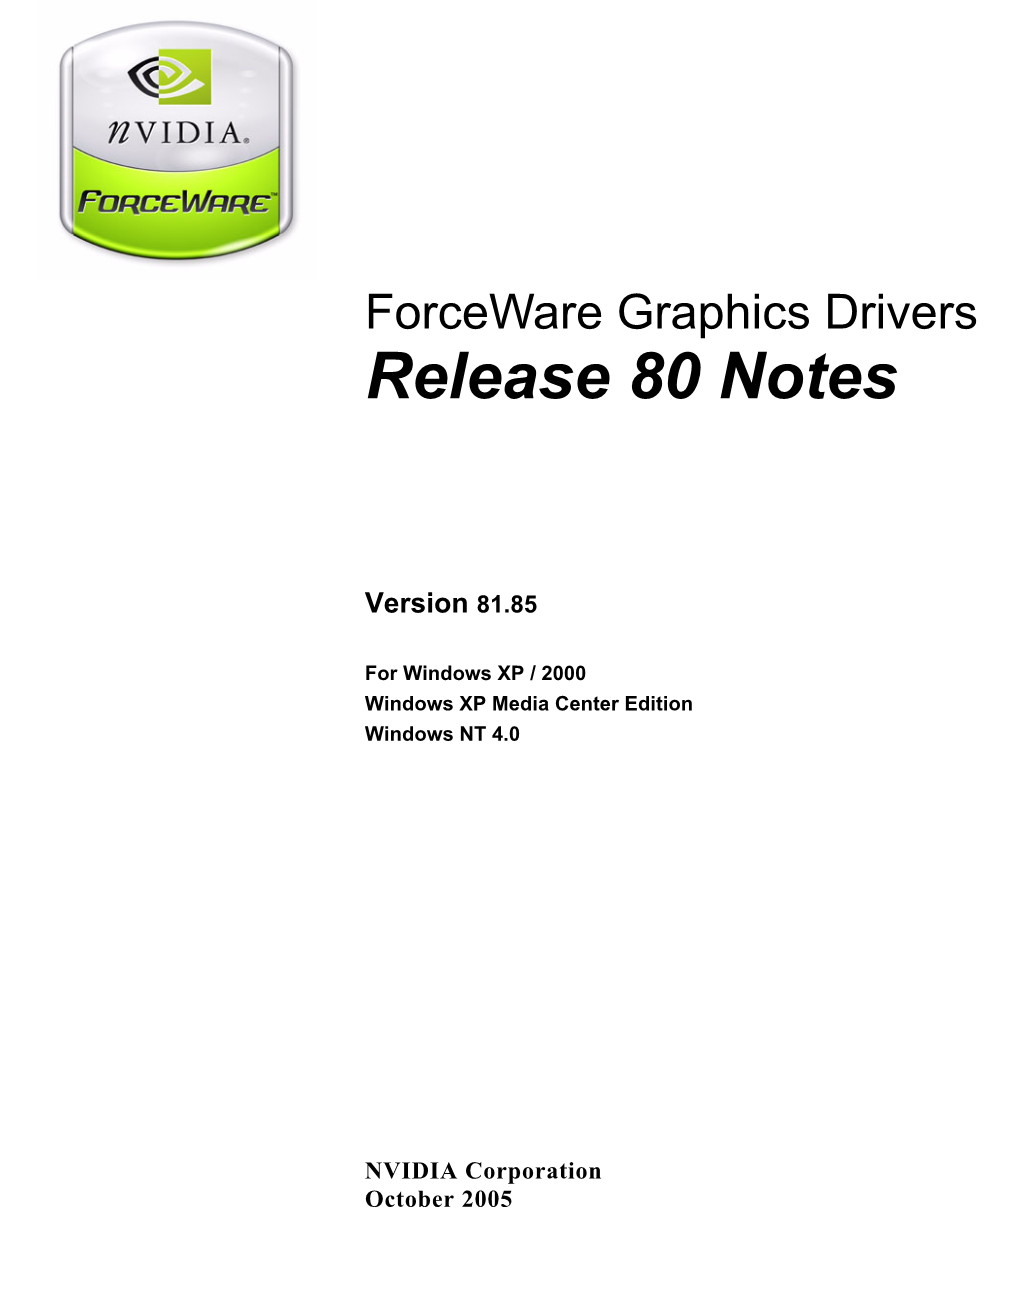 Release 80 Notes